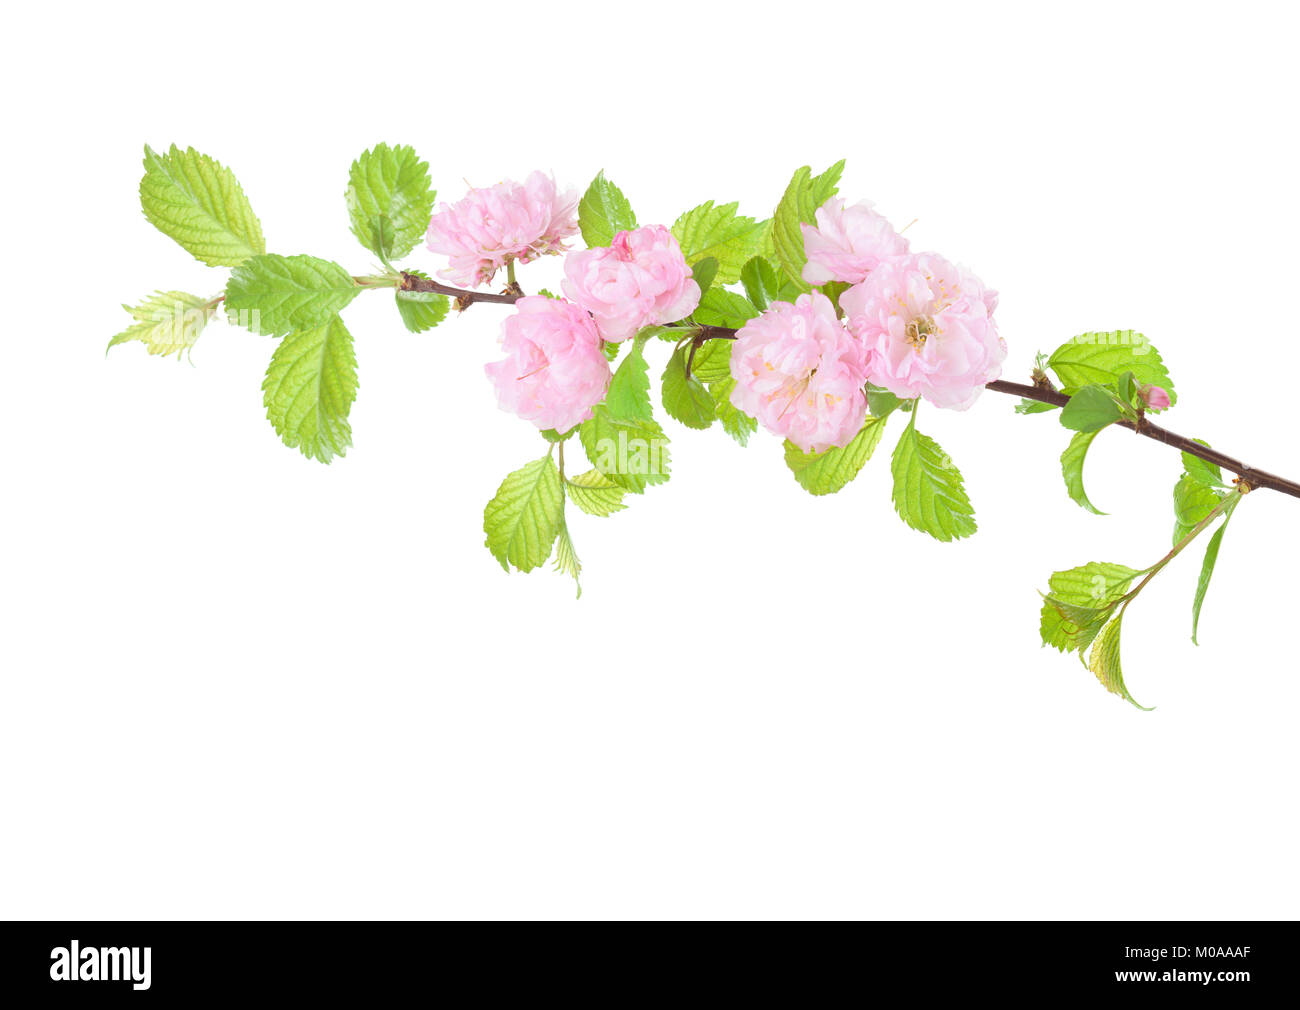 Blossoming Almond branch isolated on white background. Prunus triloba. Stock Photo